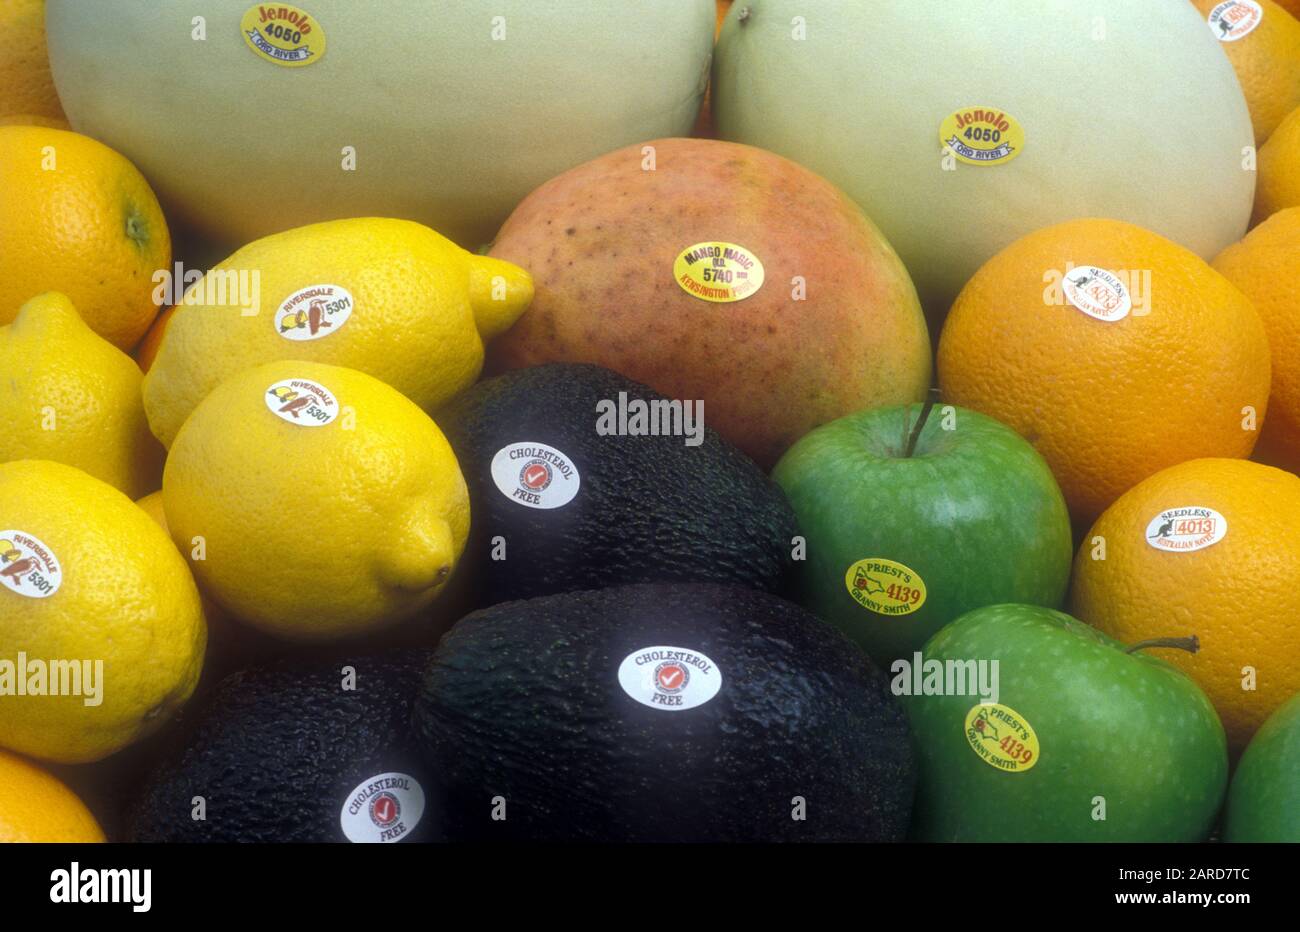 HARVESTED FRESH MIXED FRUIT (GRANNY SMITH APPLES, AVOCADOS, MELONS,NAVAL ORANGES AND LEMONS, CARRYING GROWERS SEEDLESS AND CHOLESTEROL FREE LABELS. Stock Photo